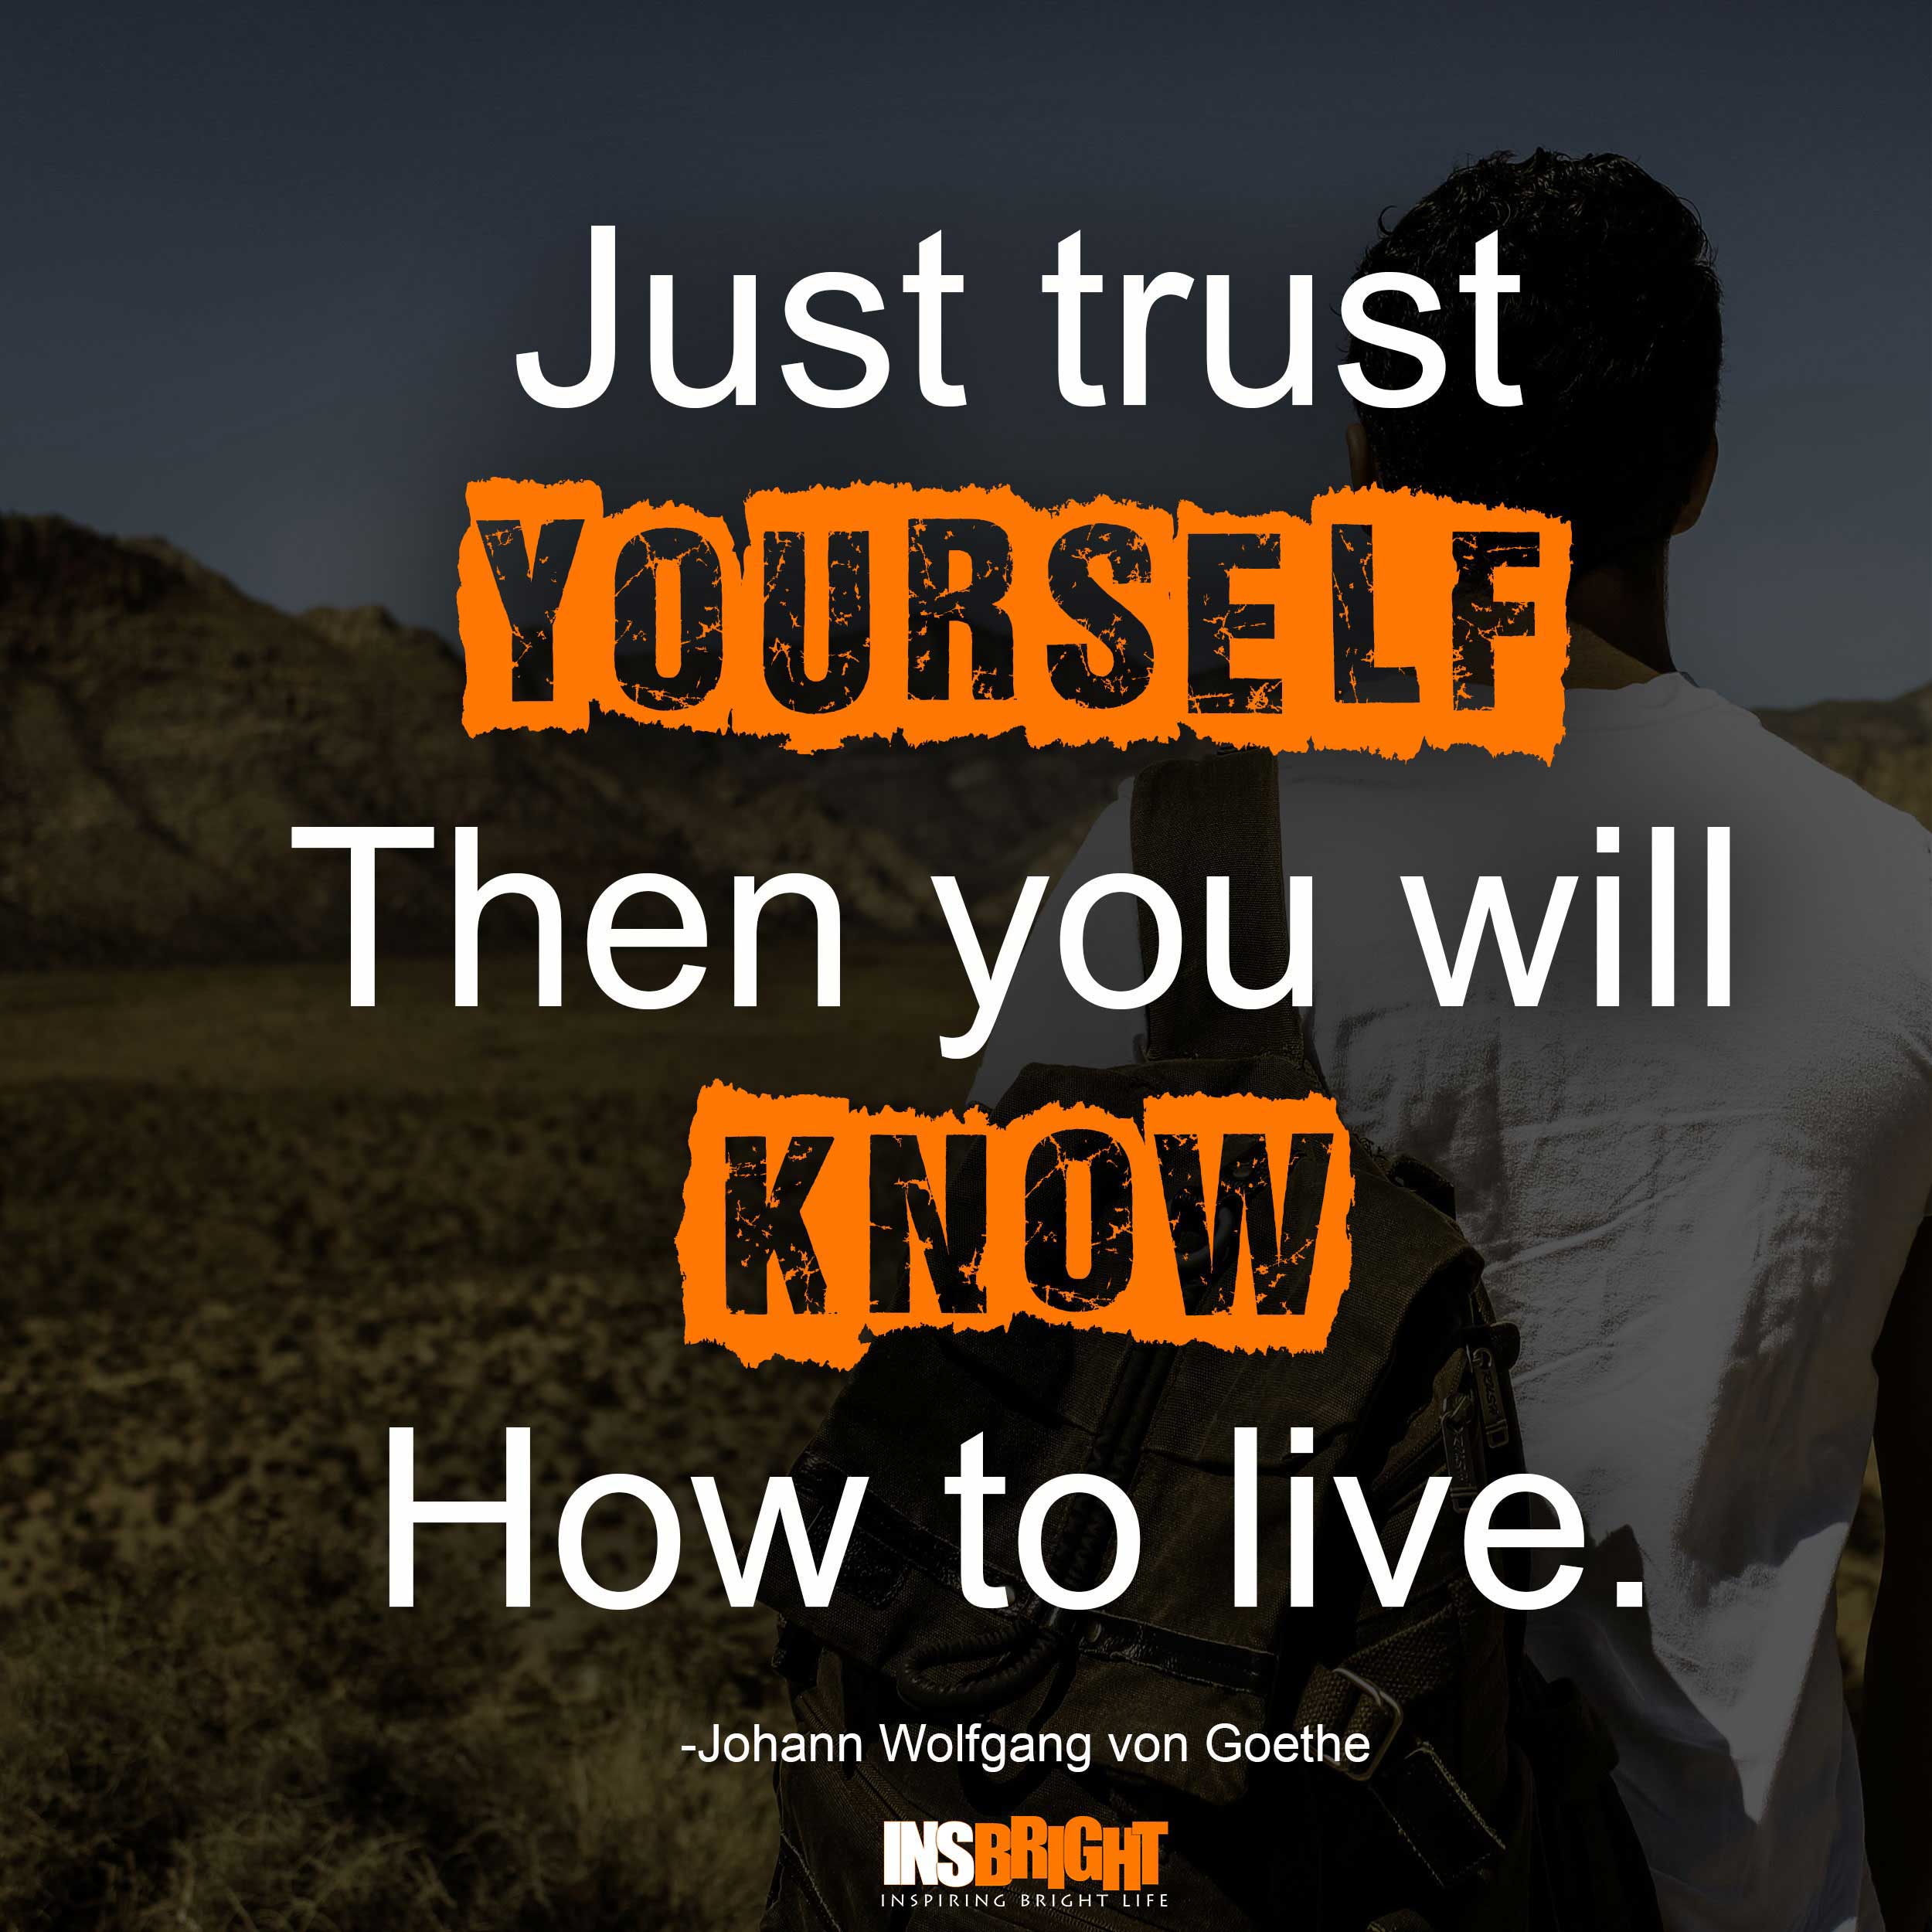 Inspirational Trust Quotes With Image